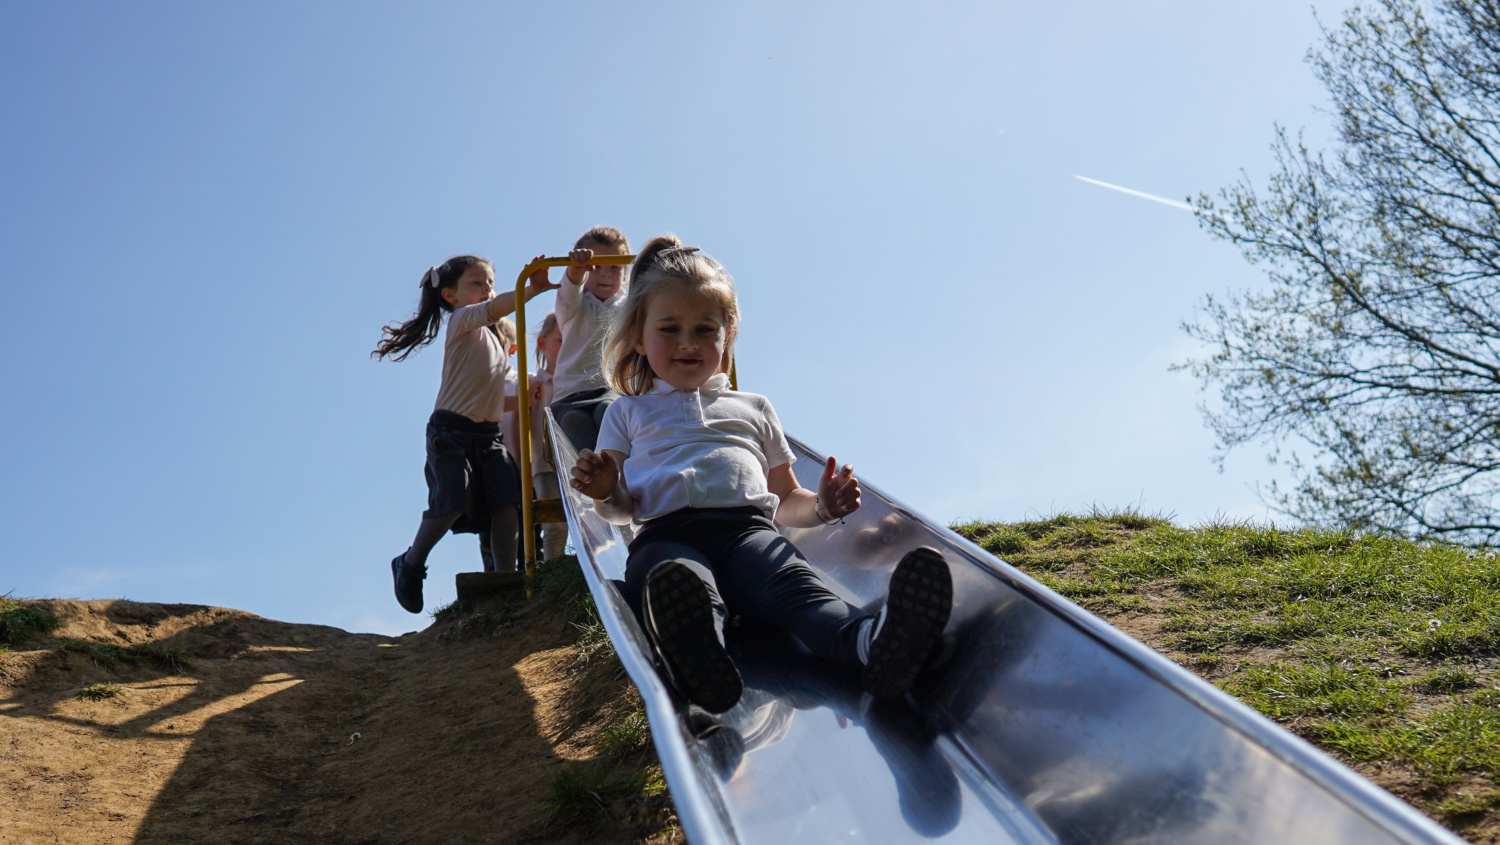 A small group of female pupils are seen queuing up to go down a slide on the academy grounds.